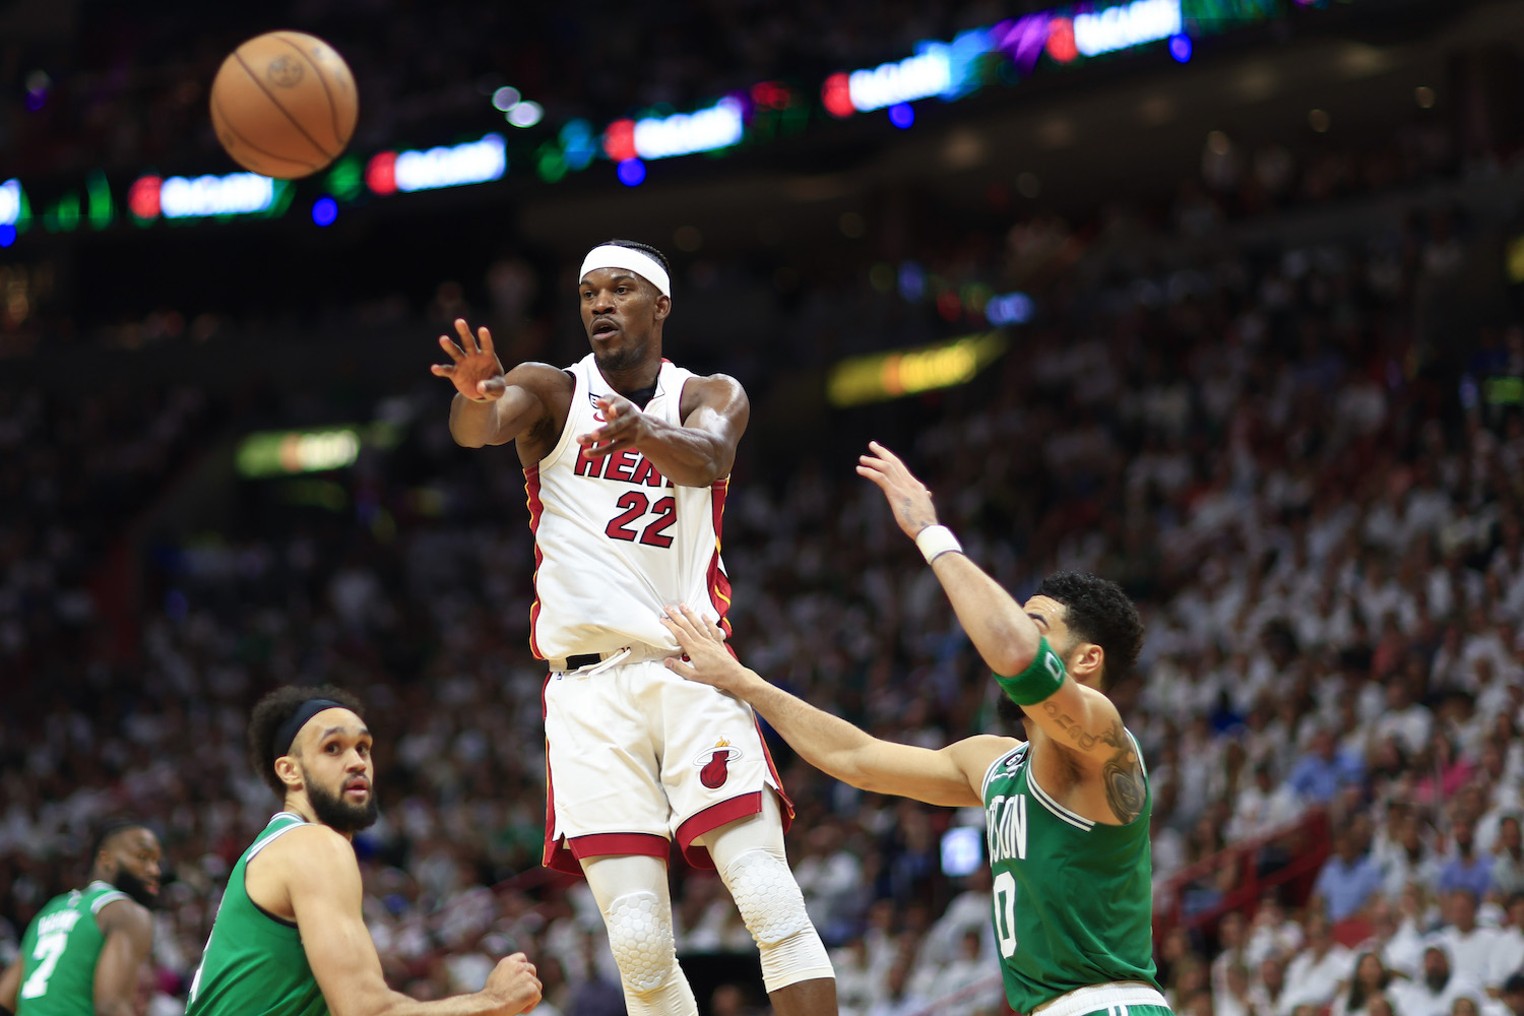 Heat and Celtics to Make History in NBA Conference Finals Game 7